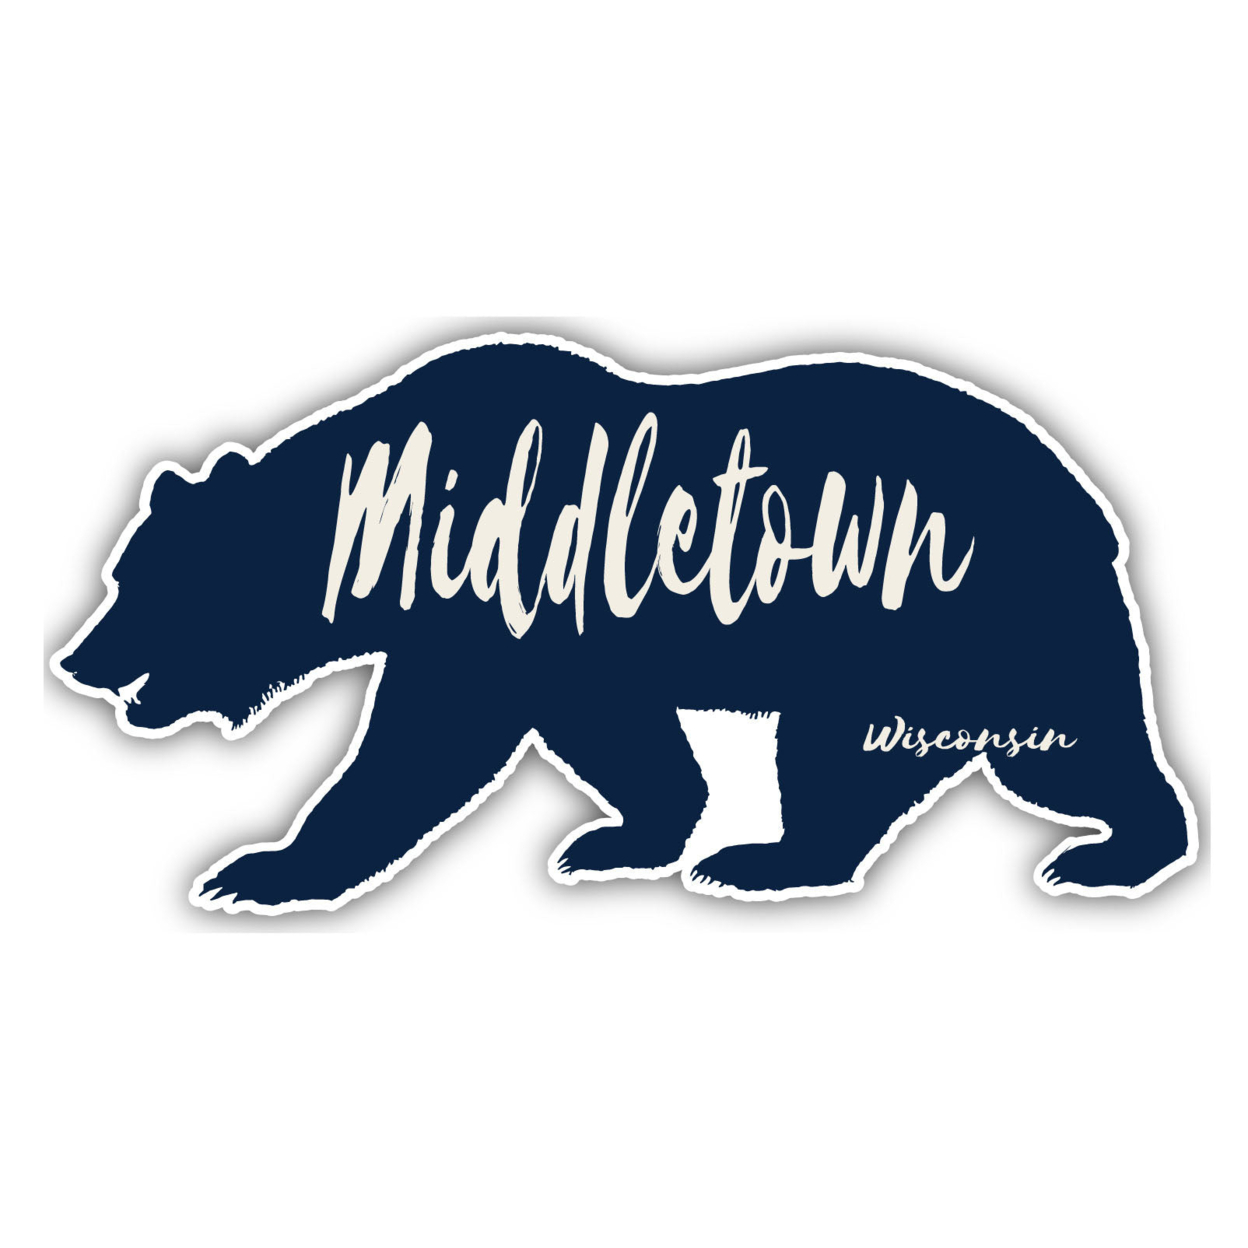 Middletown Wisconsin Souvenir Decorative Stickers (Choose Theme And Size) - 2-Inch, Bear